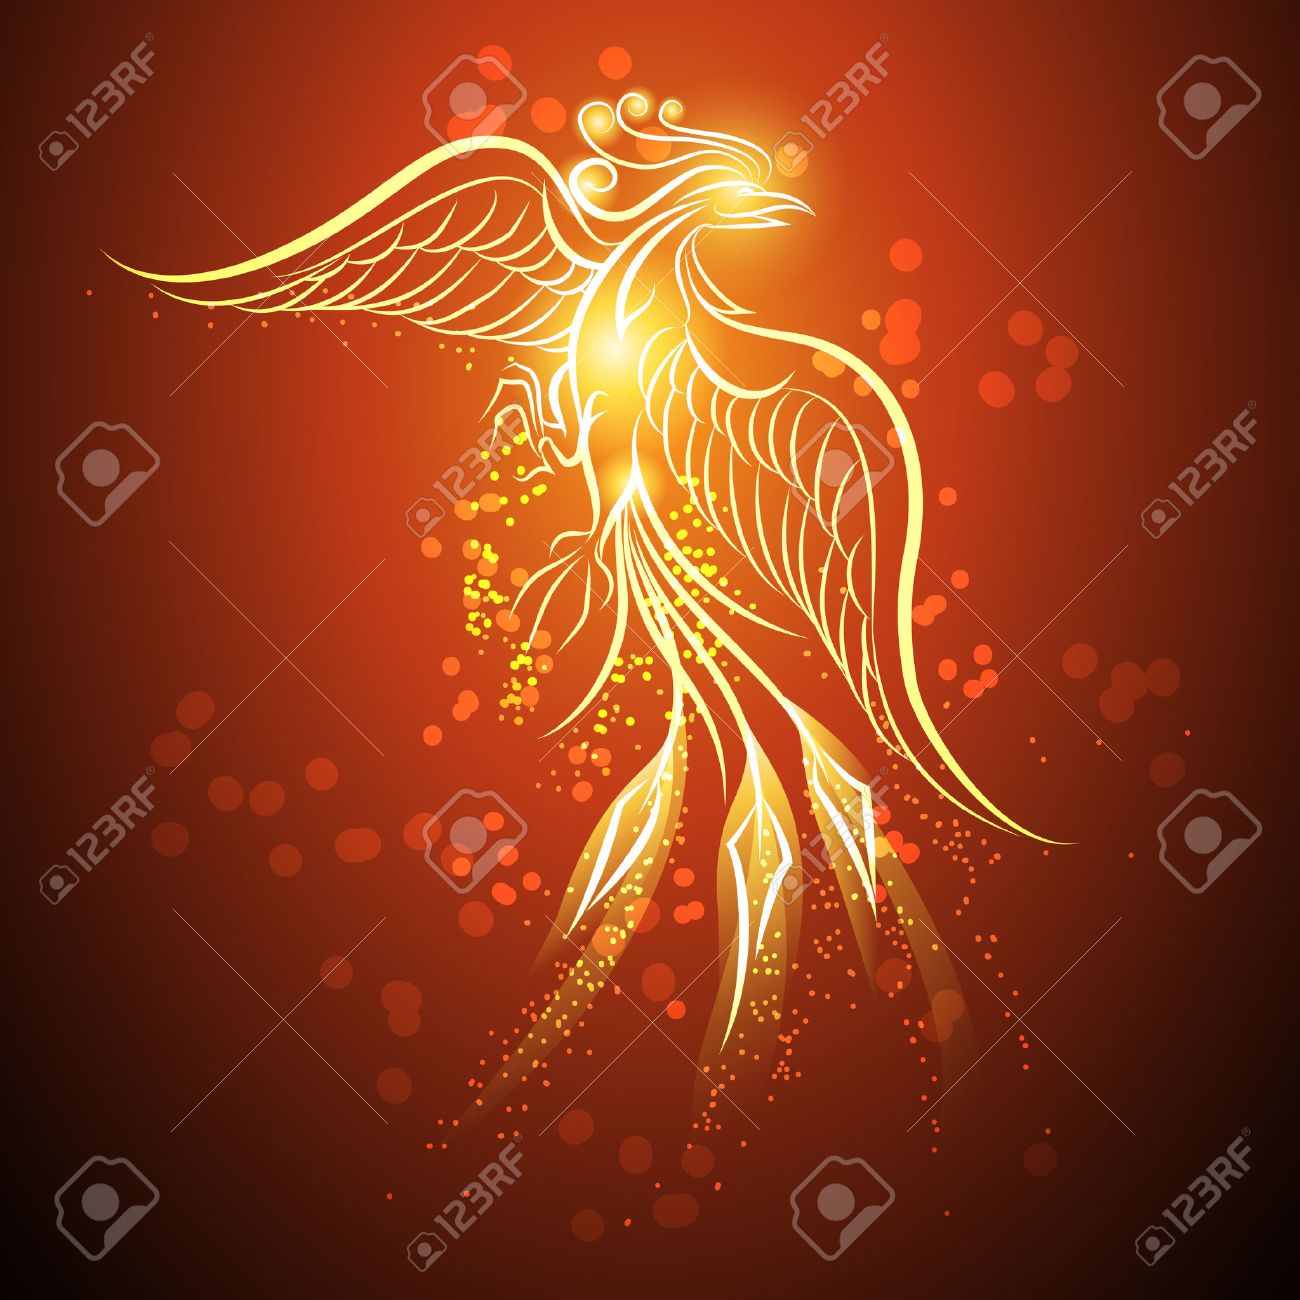 Illustration Of Rising Phoenix Against Red Dark Background As